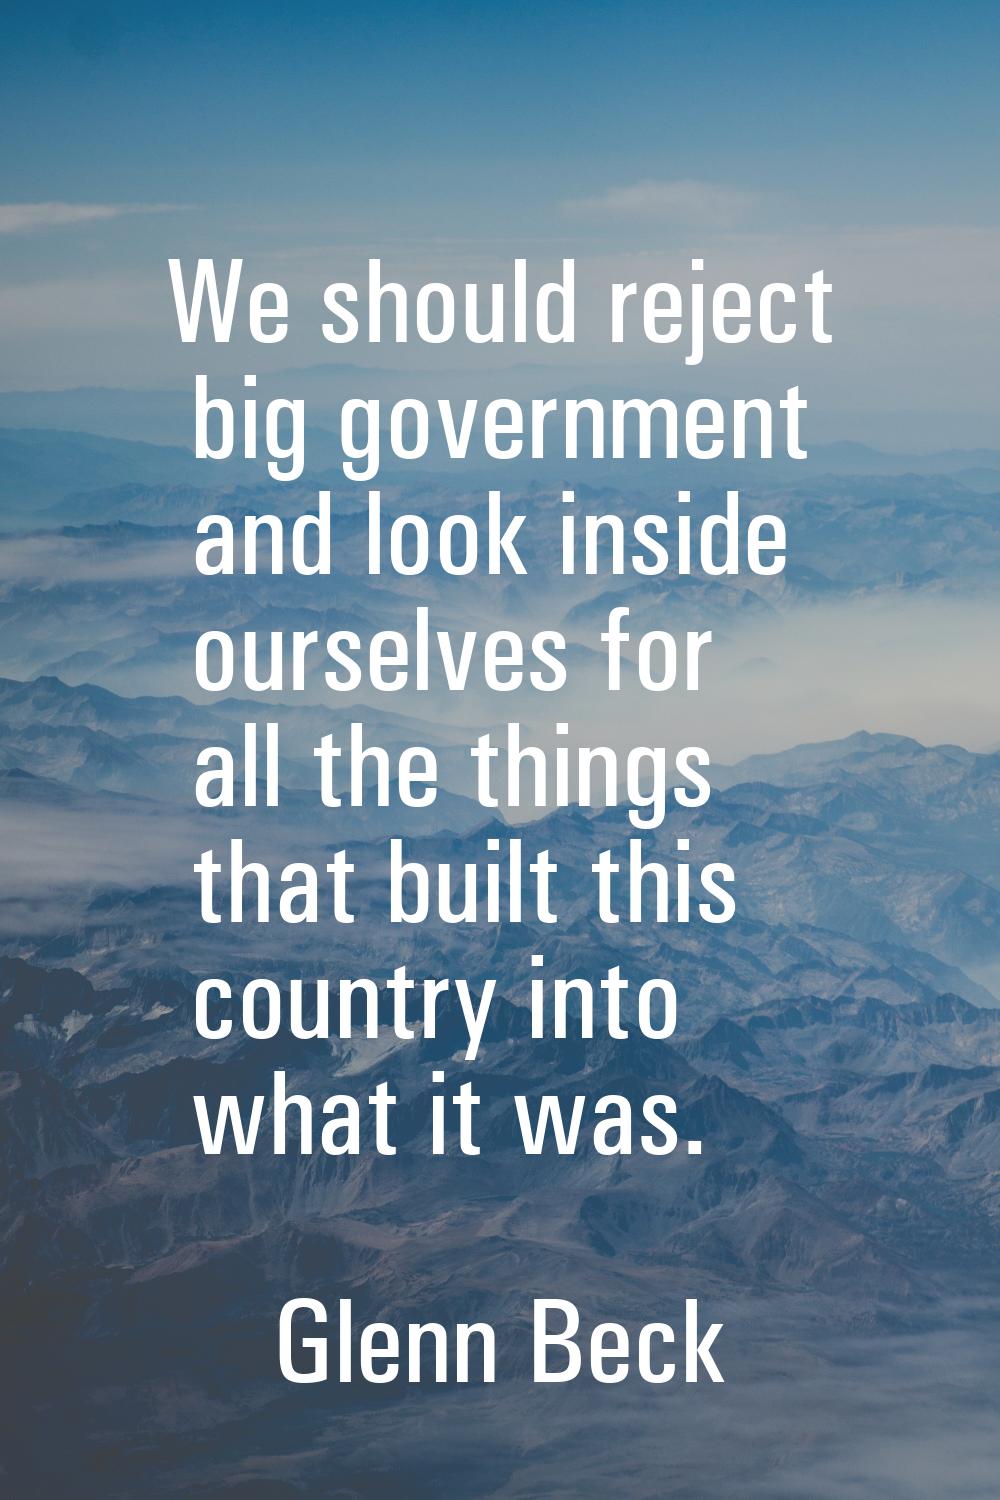 We should reject big government and look inside ourselves for all the things that built this countr